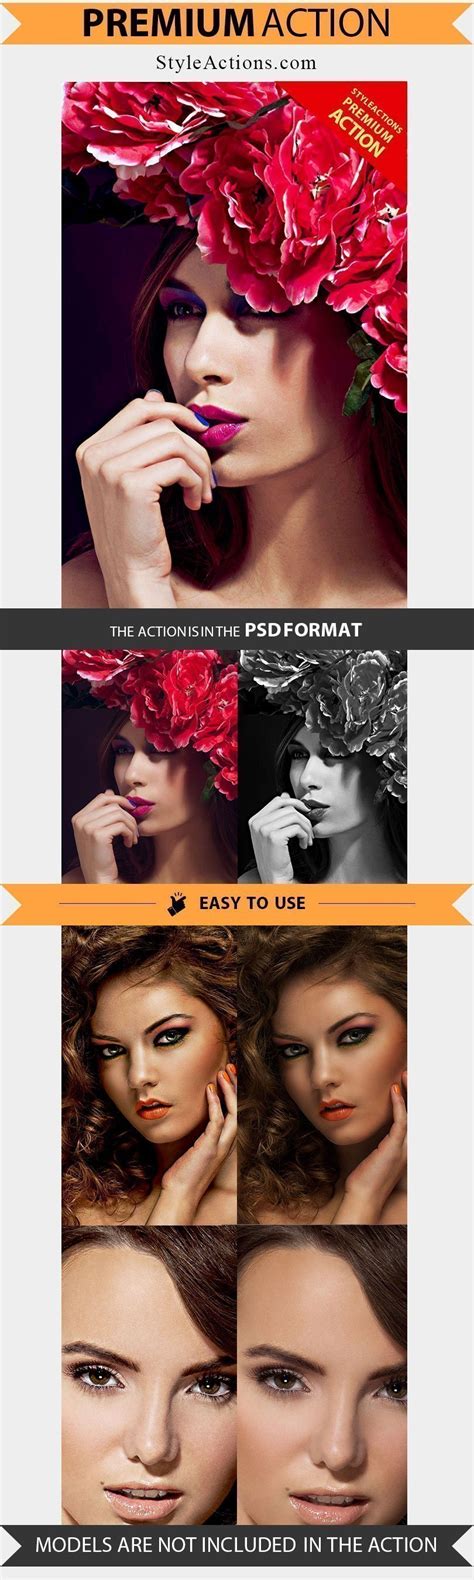 Skin Retouch Photoshop Action 21738 Styleactions